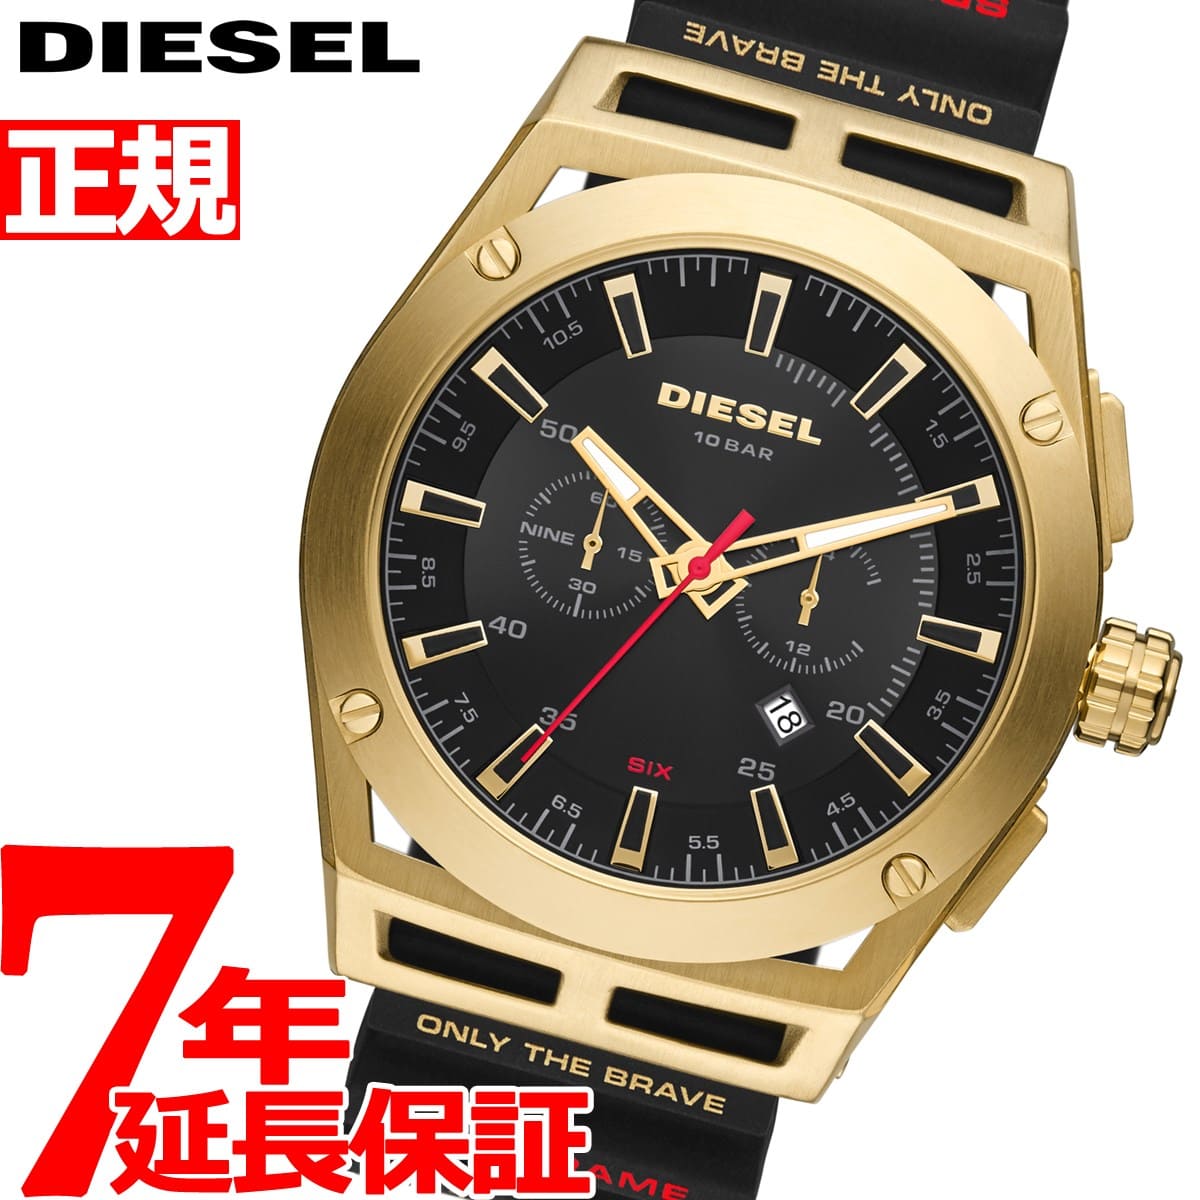 is 11 - 2021 in at until Chronograph It DZ4546 March times! mens 4 57 & on up latest Store frame TIMEFRAME to DIESEL March diesel time on 1:59 20:00 2,000 - to FORWARD New]up BE